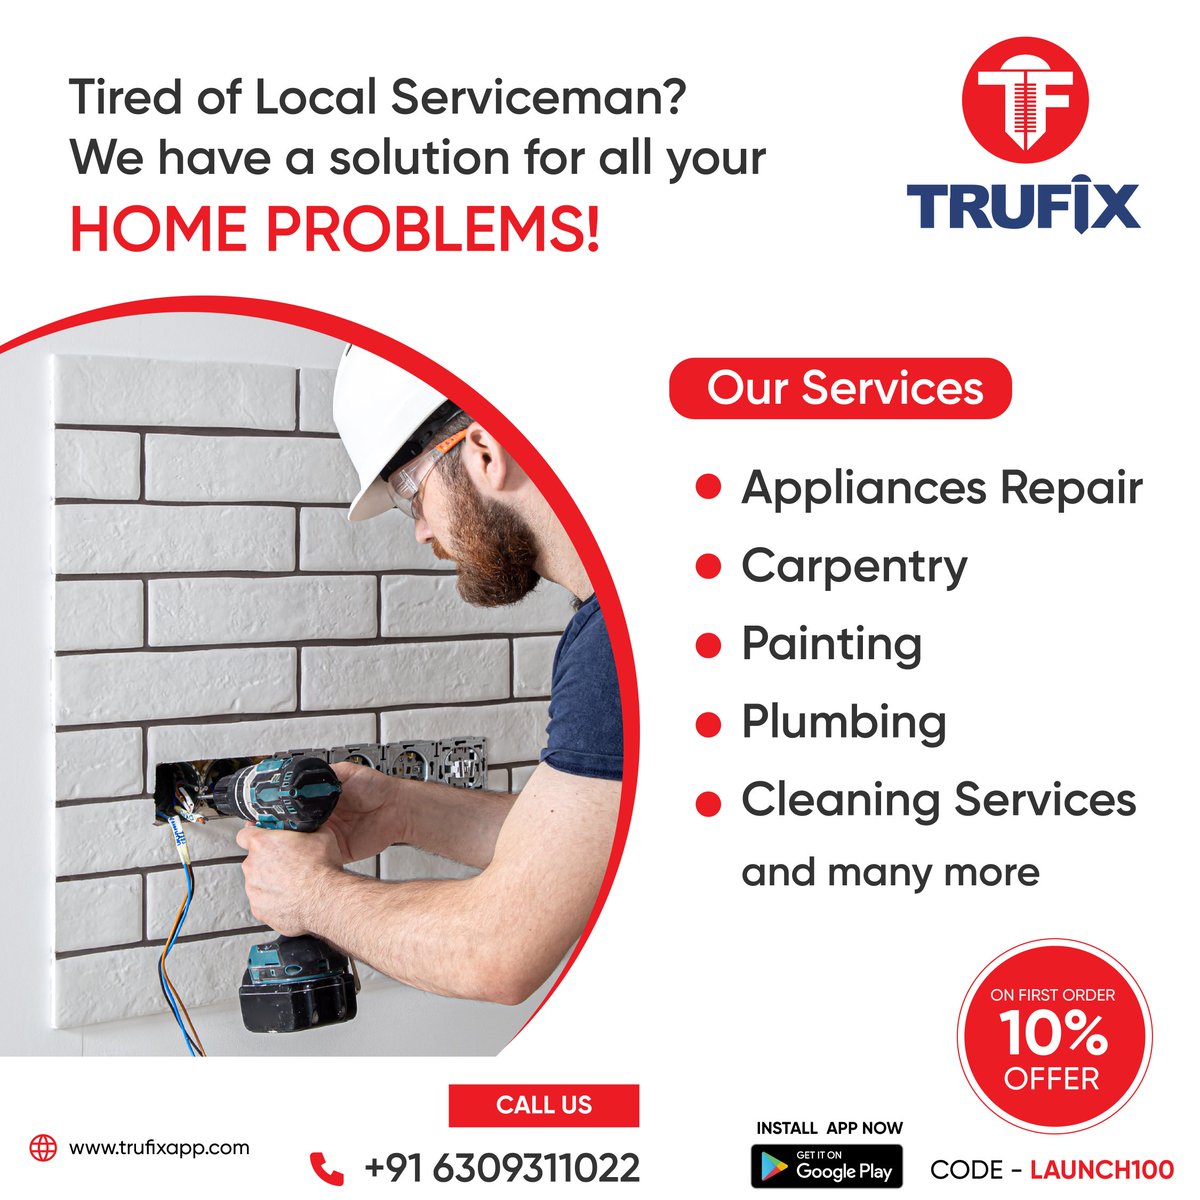 Tired of local Servicemen? We have a solution for all your Home problems! 
#Trufix is here in Guntur for your #HomeRepairs done at lowest price. Our services includes #AppliancesRepair, #CleaningServices, #Carpentry, #Painting, #Plumbing and more. 

For booking, Call@6309311022